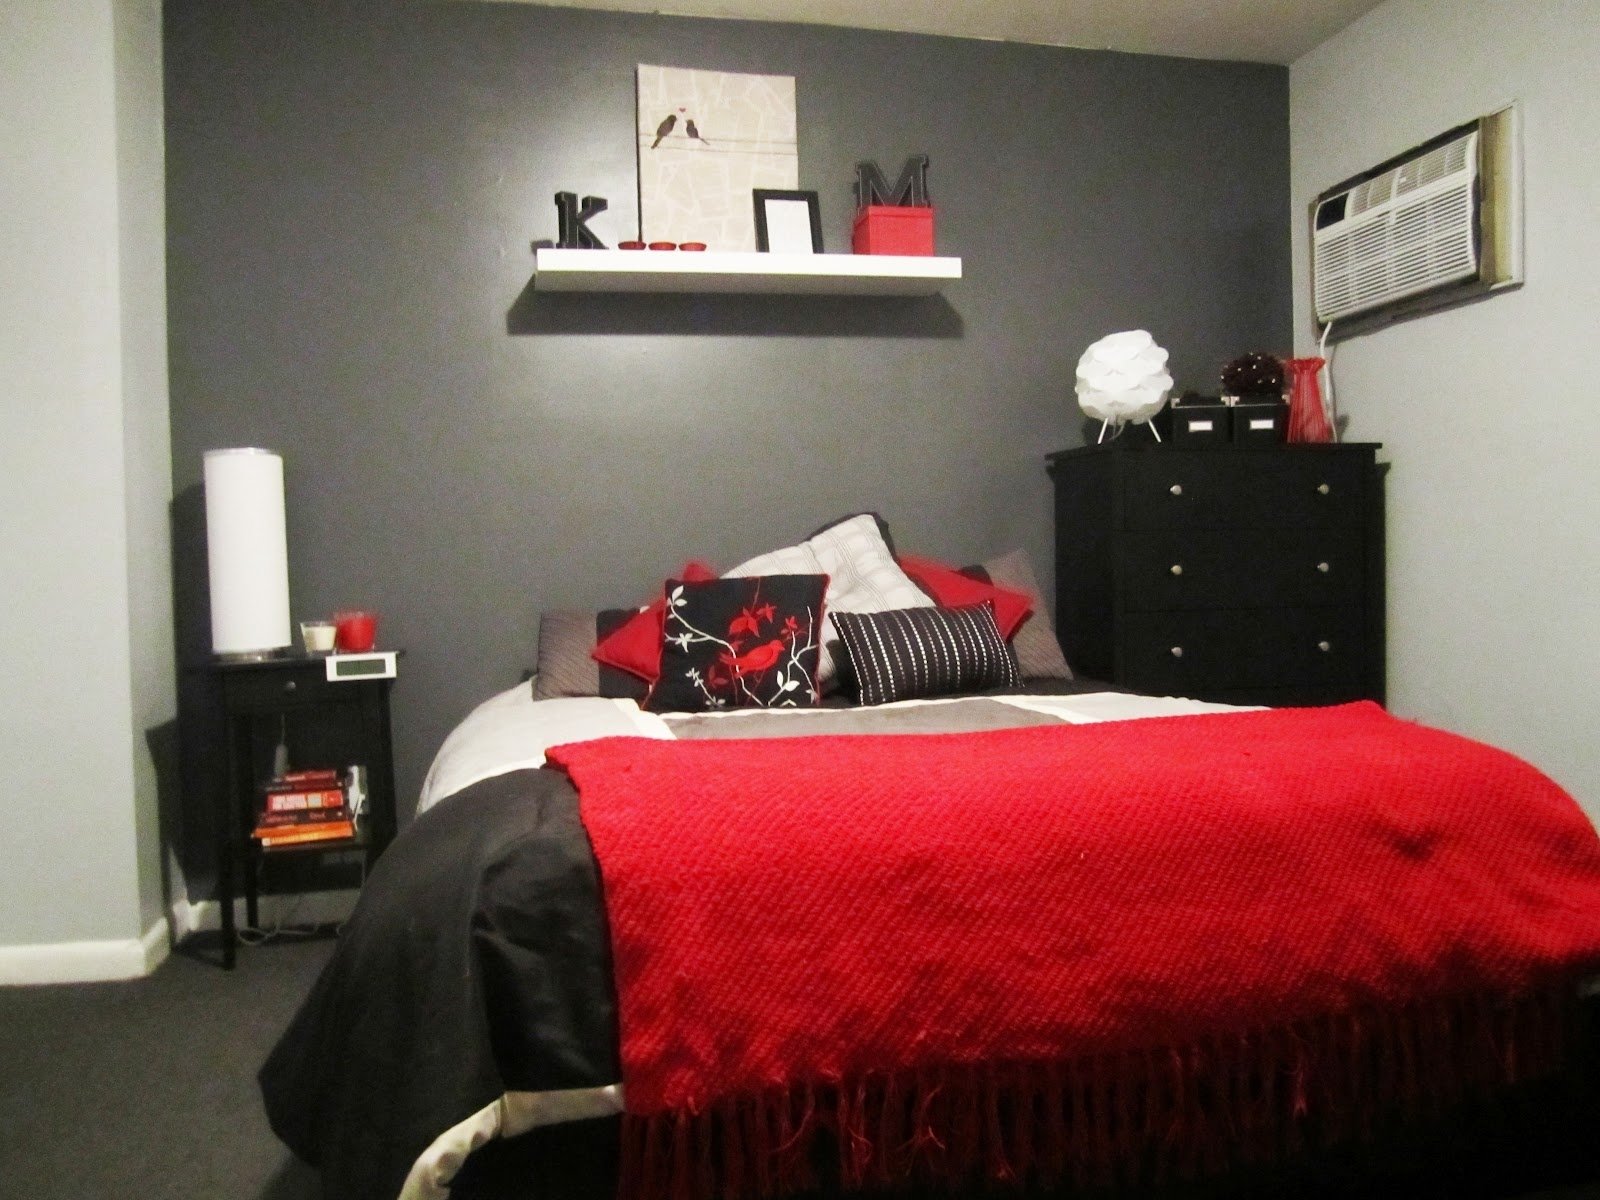 10 Trendy Red And Black Room Ideas black white and red bedroom decor modern with black white design new 2022